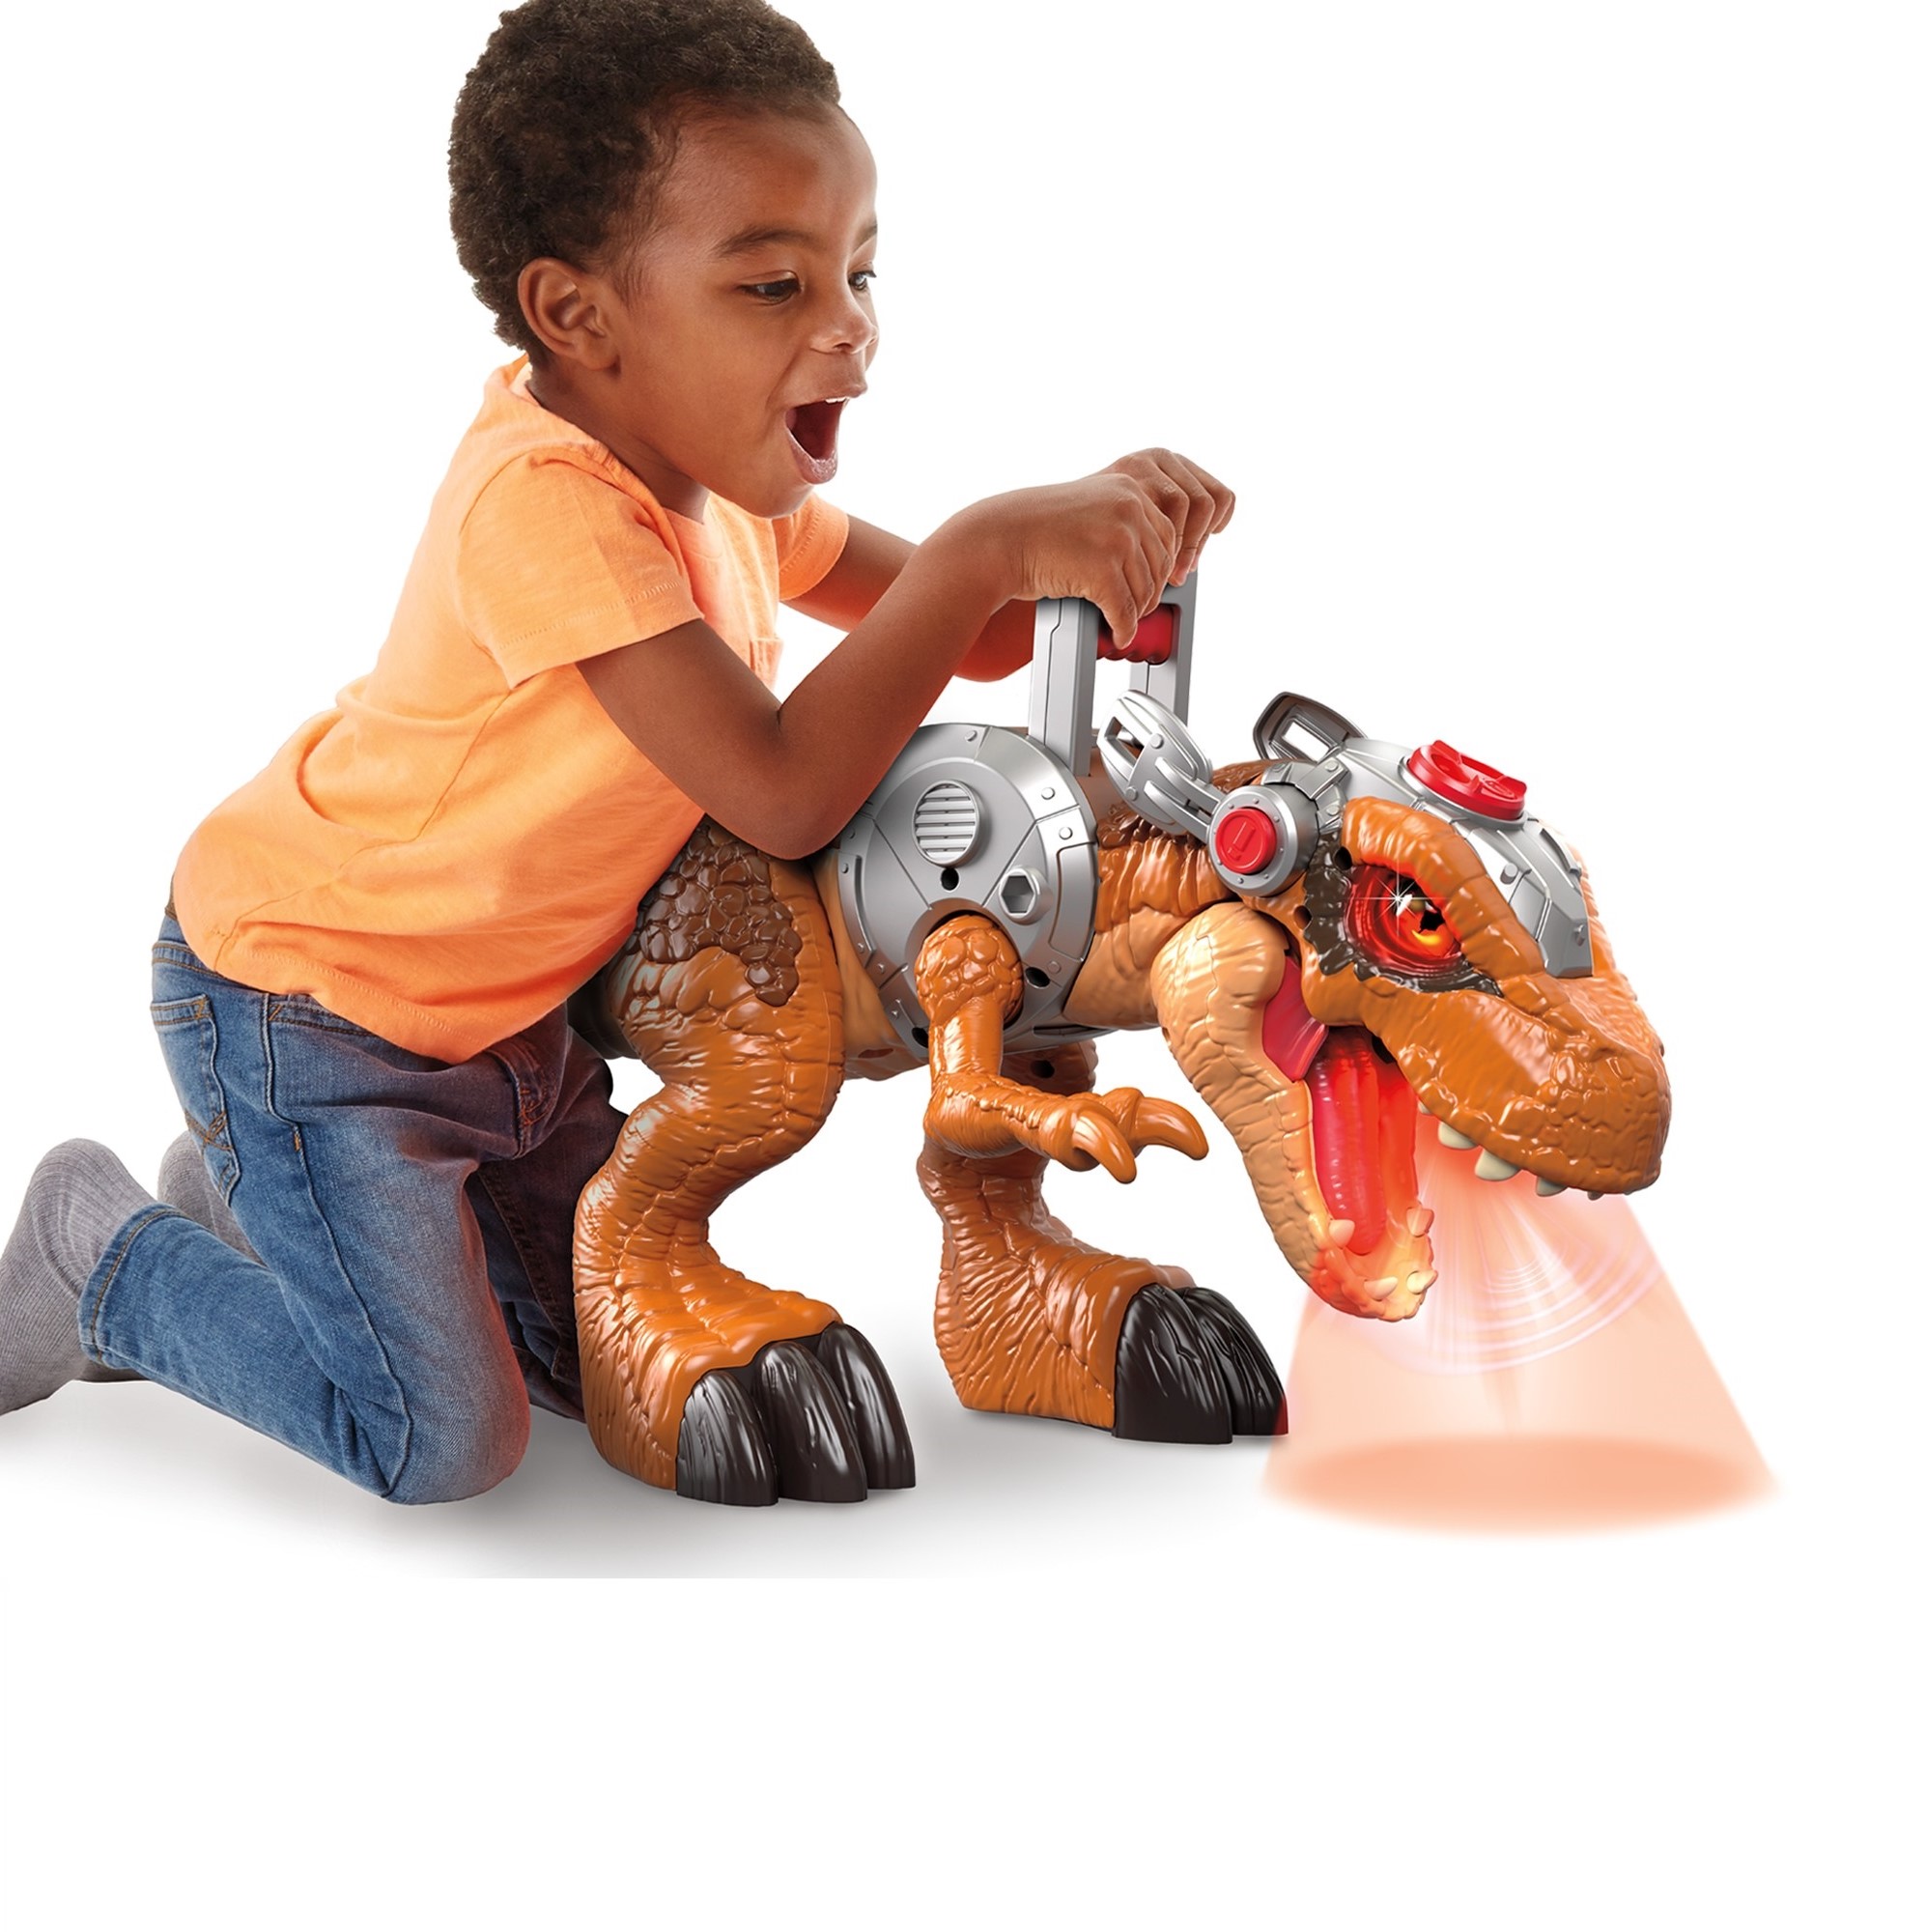 Imaginext Jurassic World MEGA T-Rex with Lights and Sounds - image 1 of 6